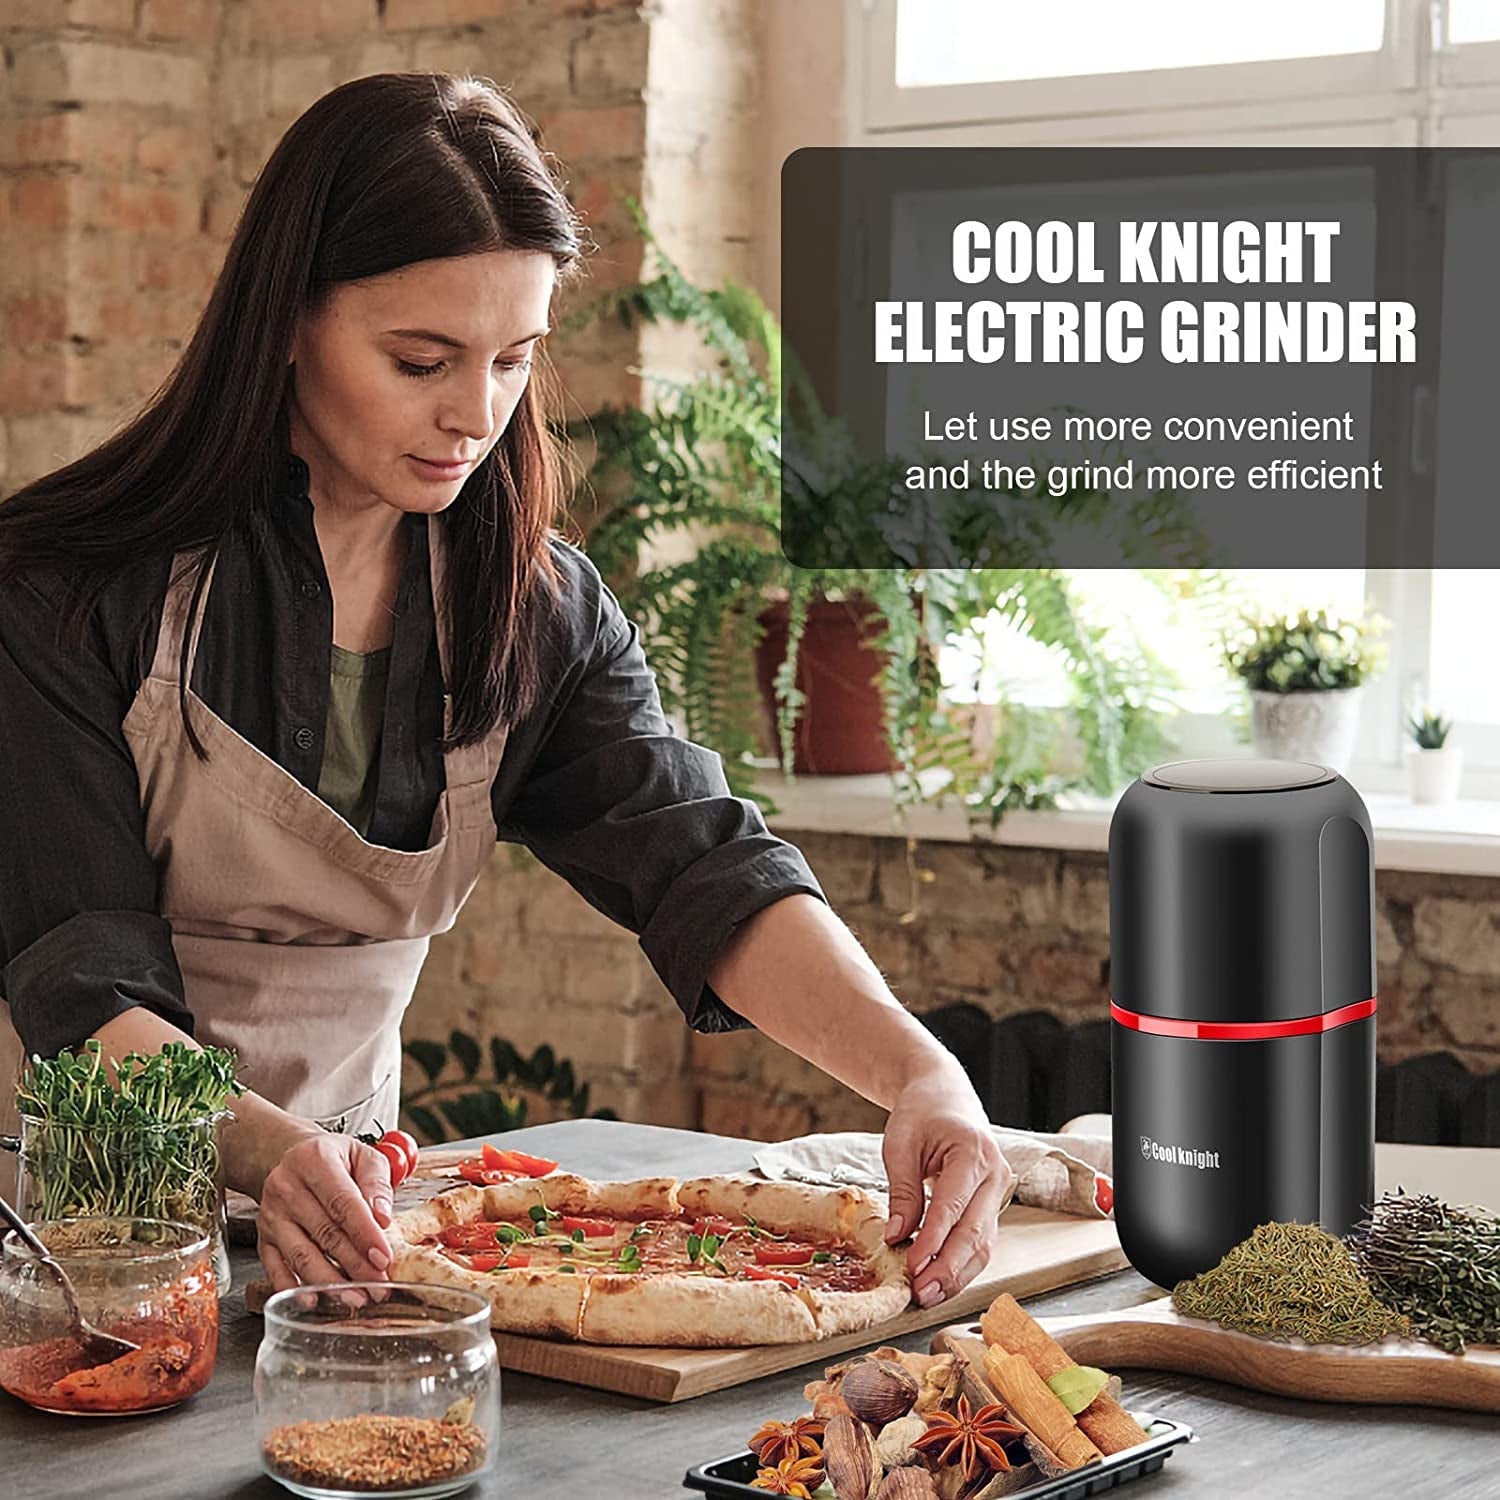 Large Capacity Electric Herb, Spice, & Coffee Grinder with Pollen Catcher